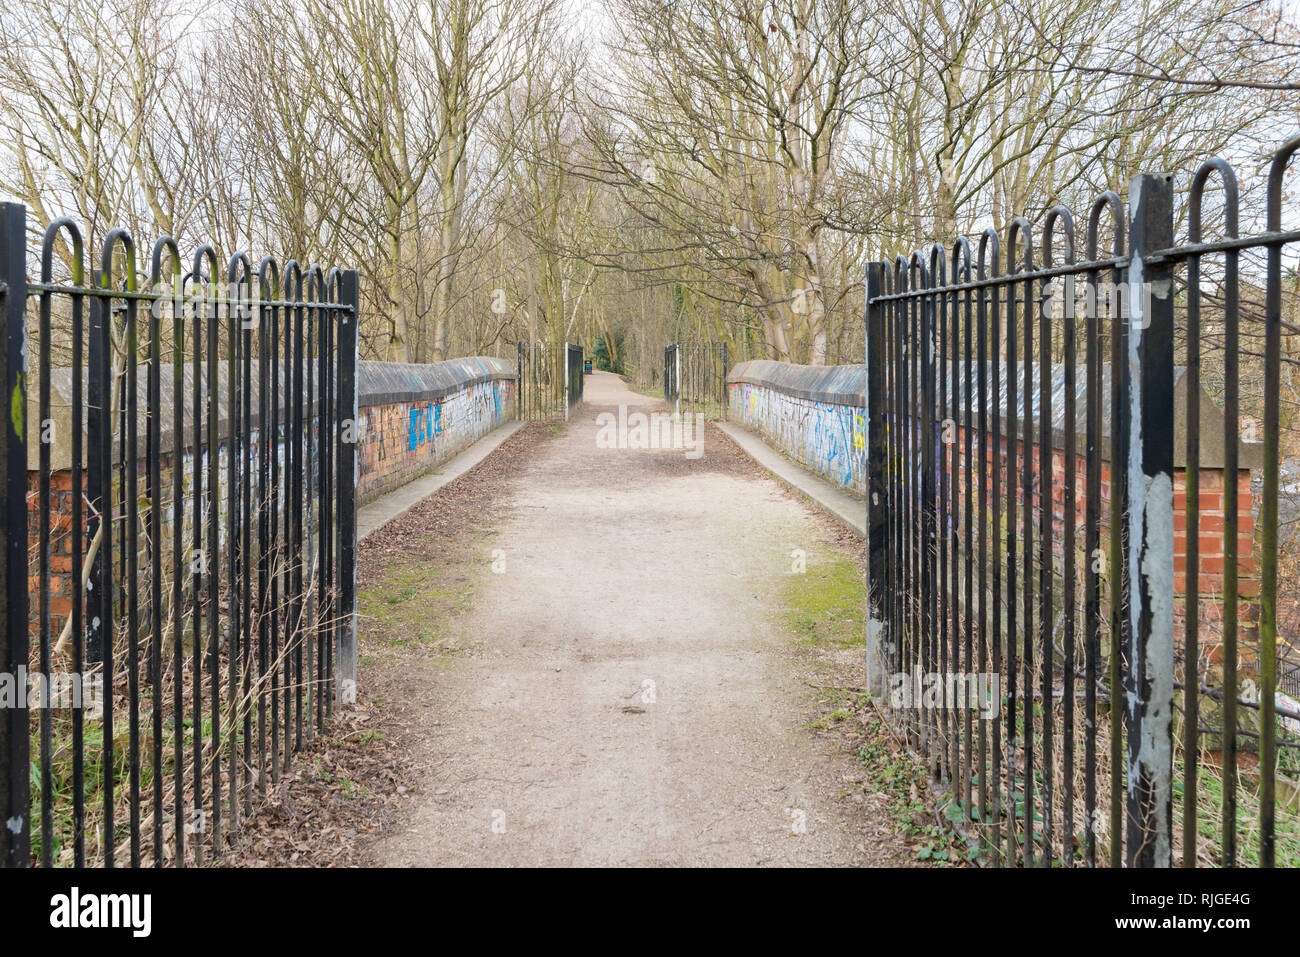 The Old Railway Line In Harborne Birmingham Which Is Now A Pathway Called Harborne Walkway